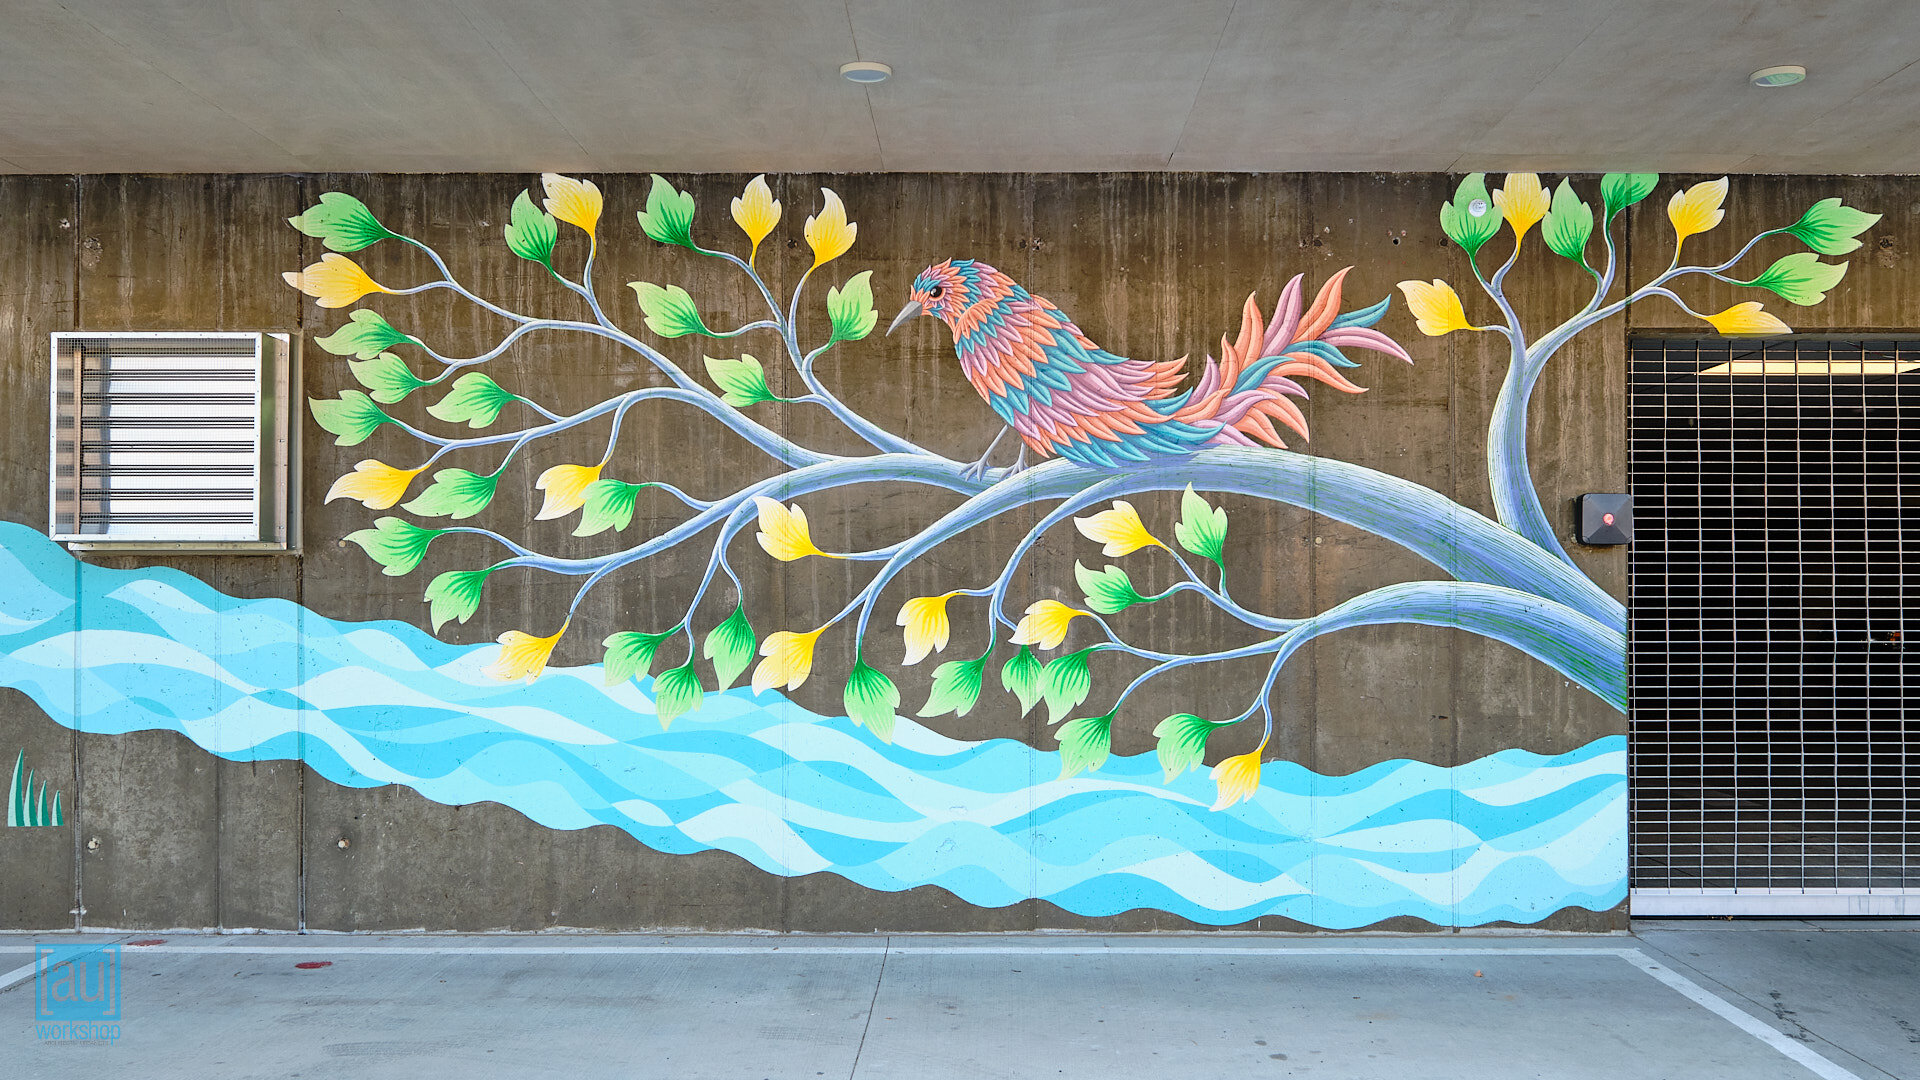 Completed Mural - Detail